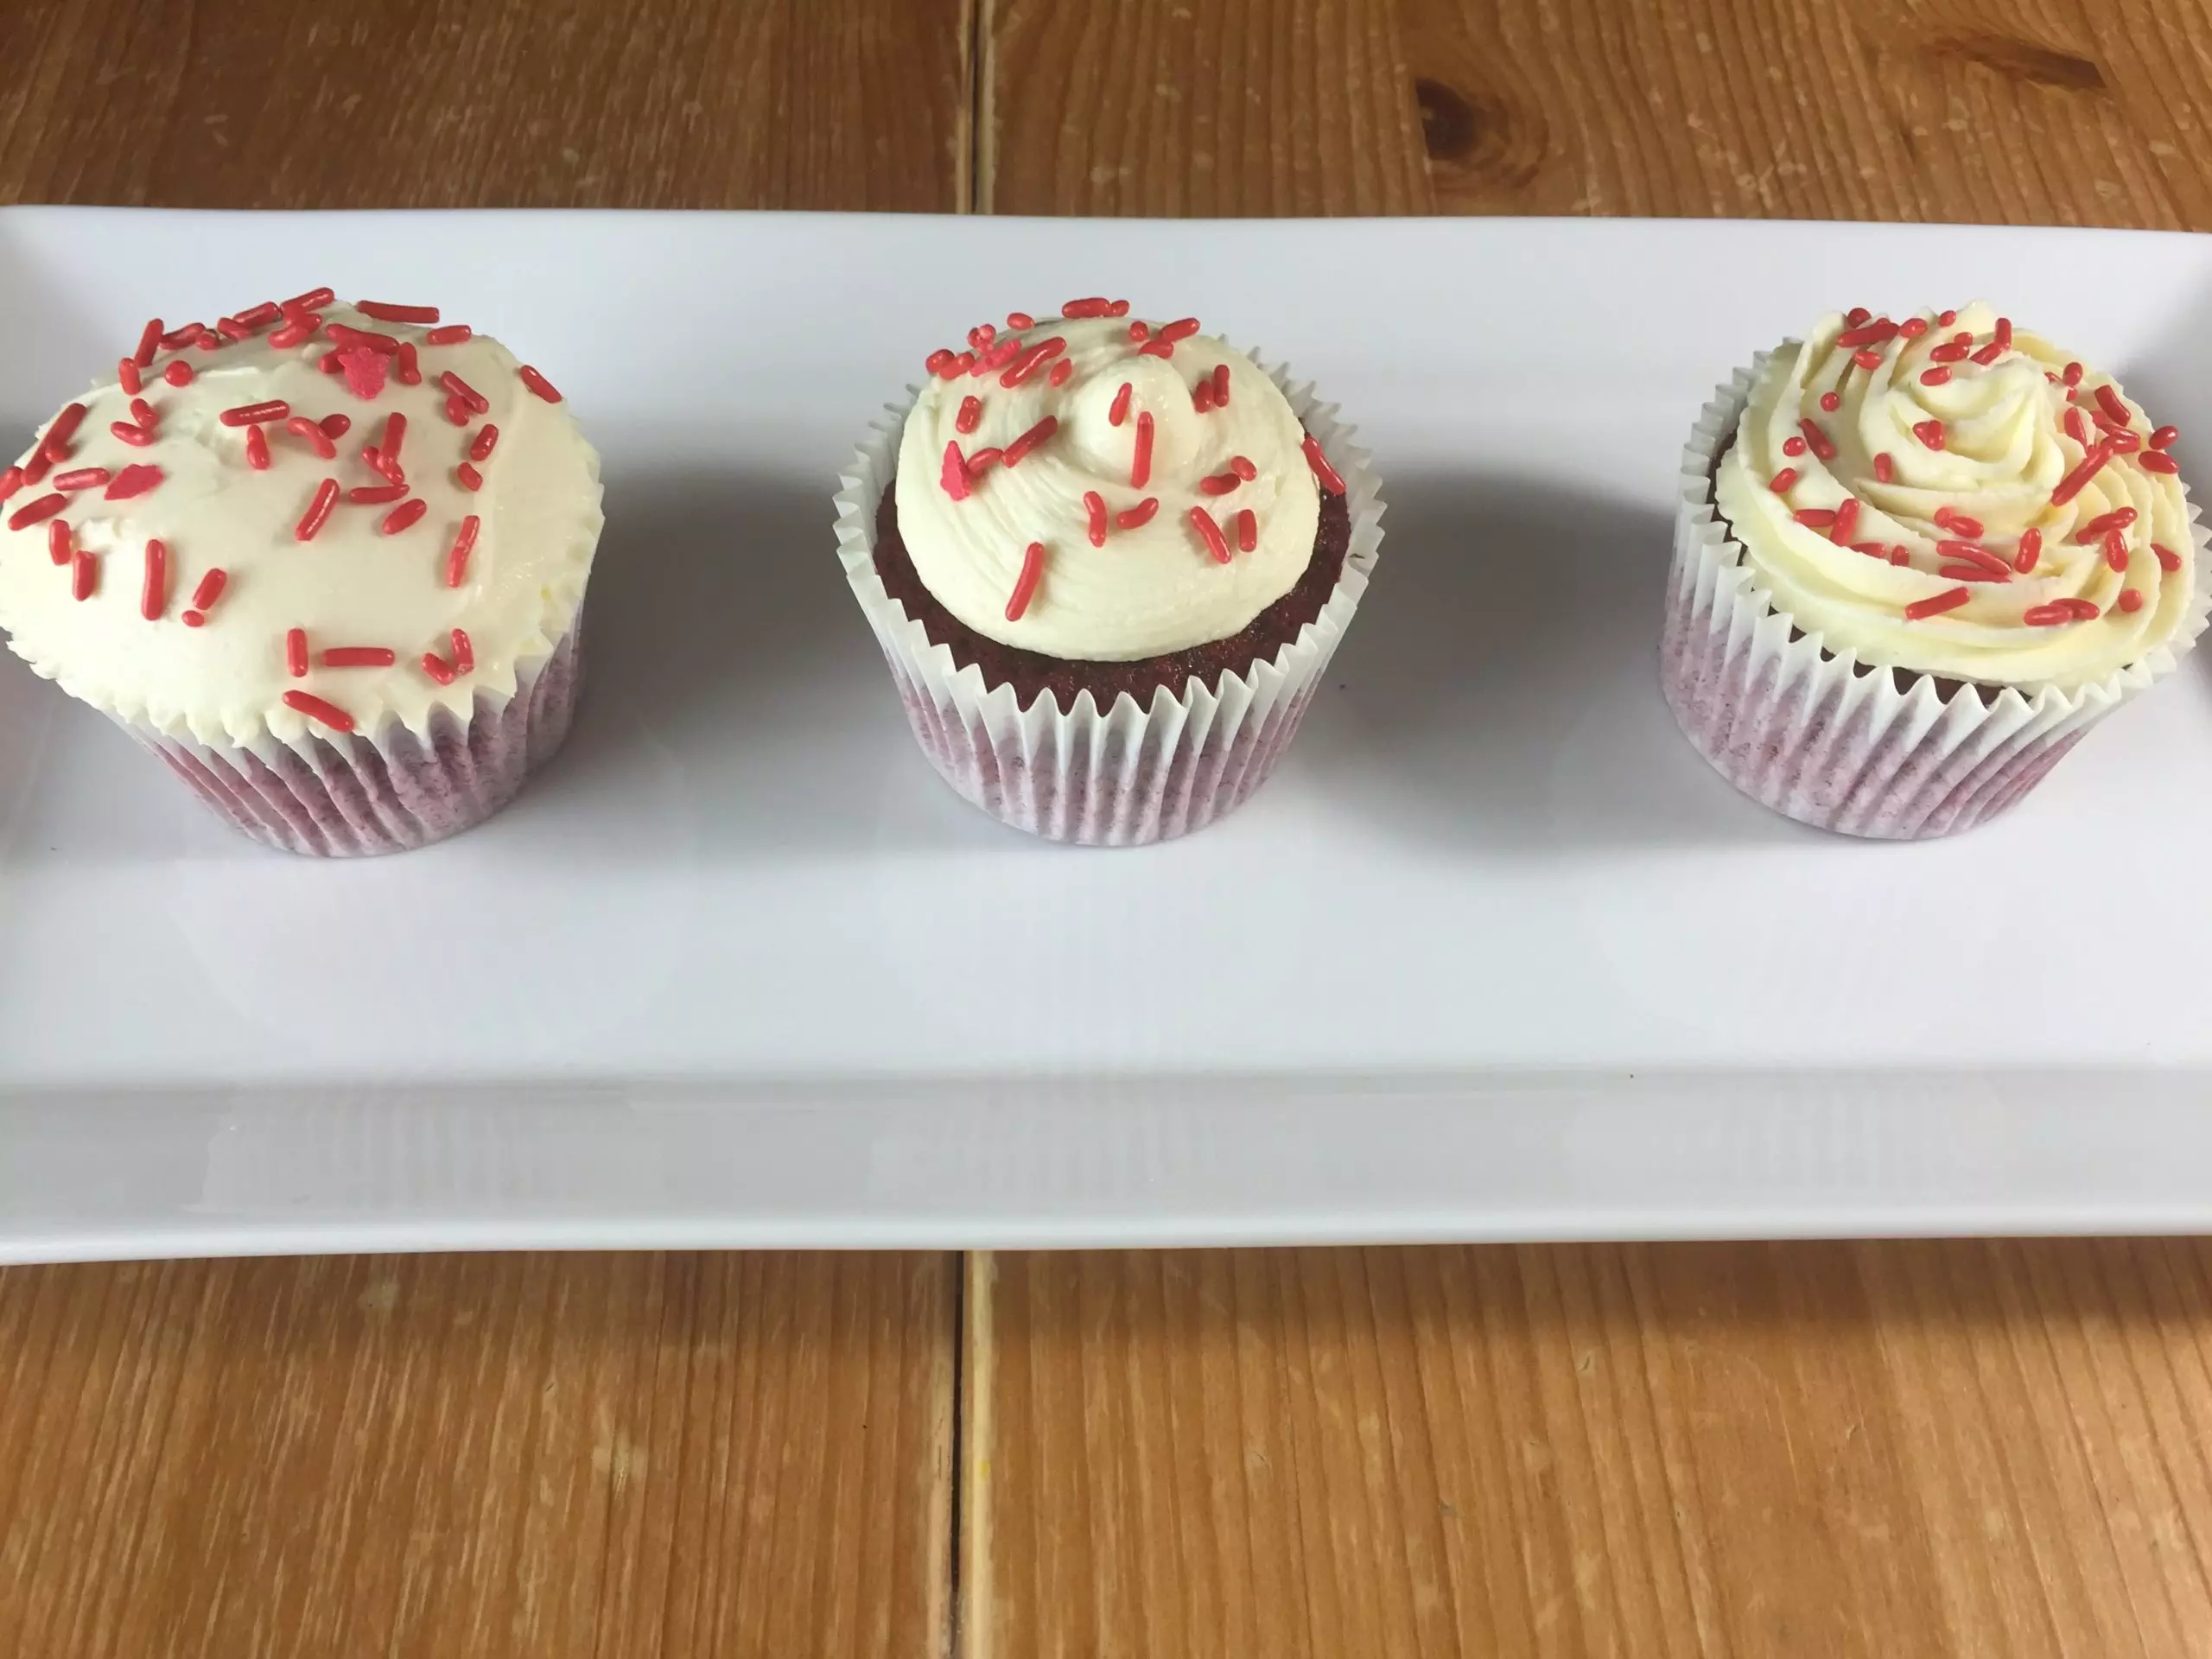 How to decorate red velvet cupcakes with cream cheese frosting